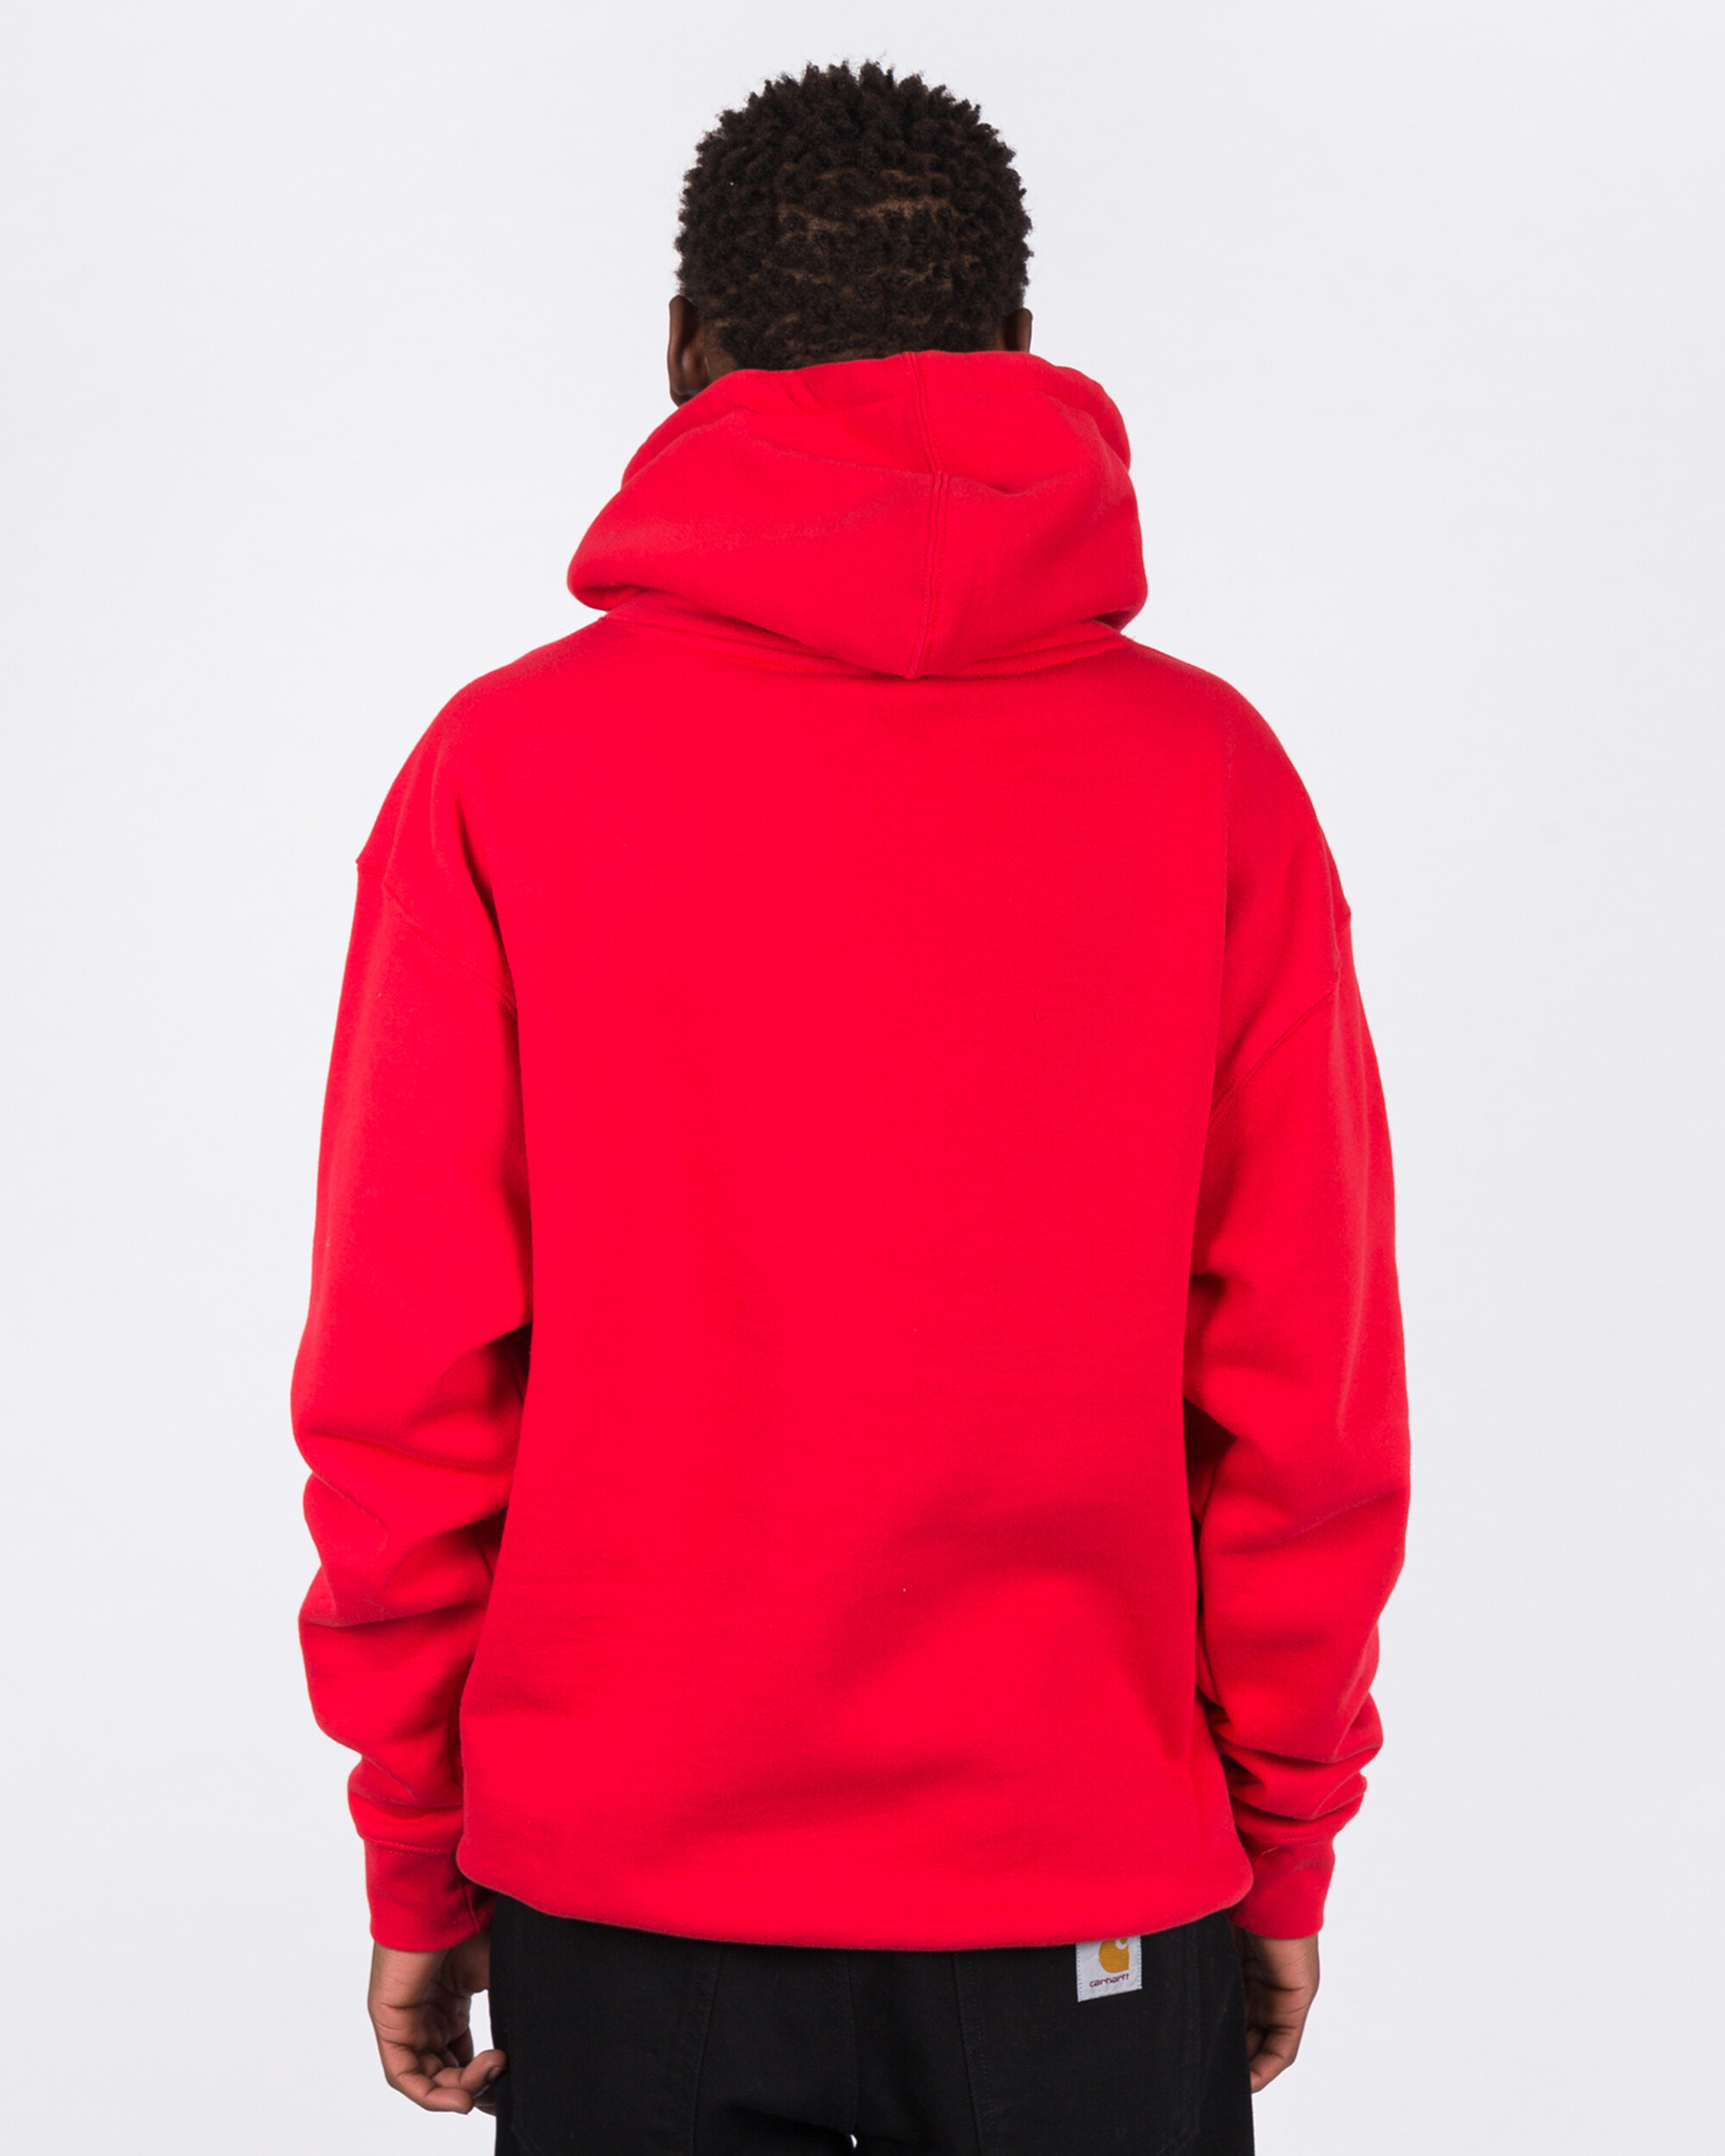 Call me 917 Area Code Pullover Hood Red